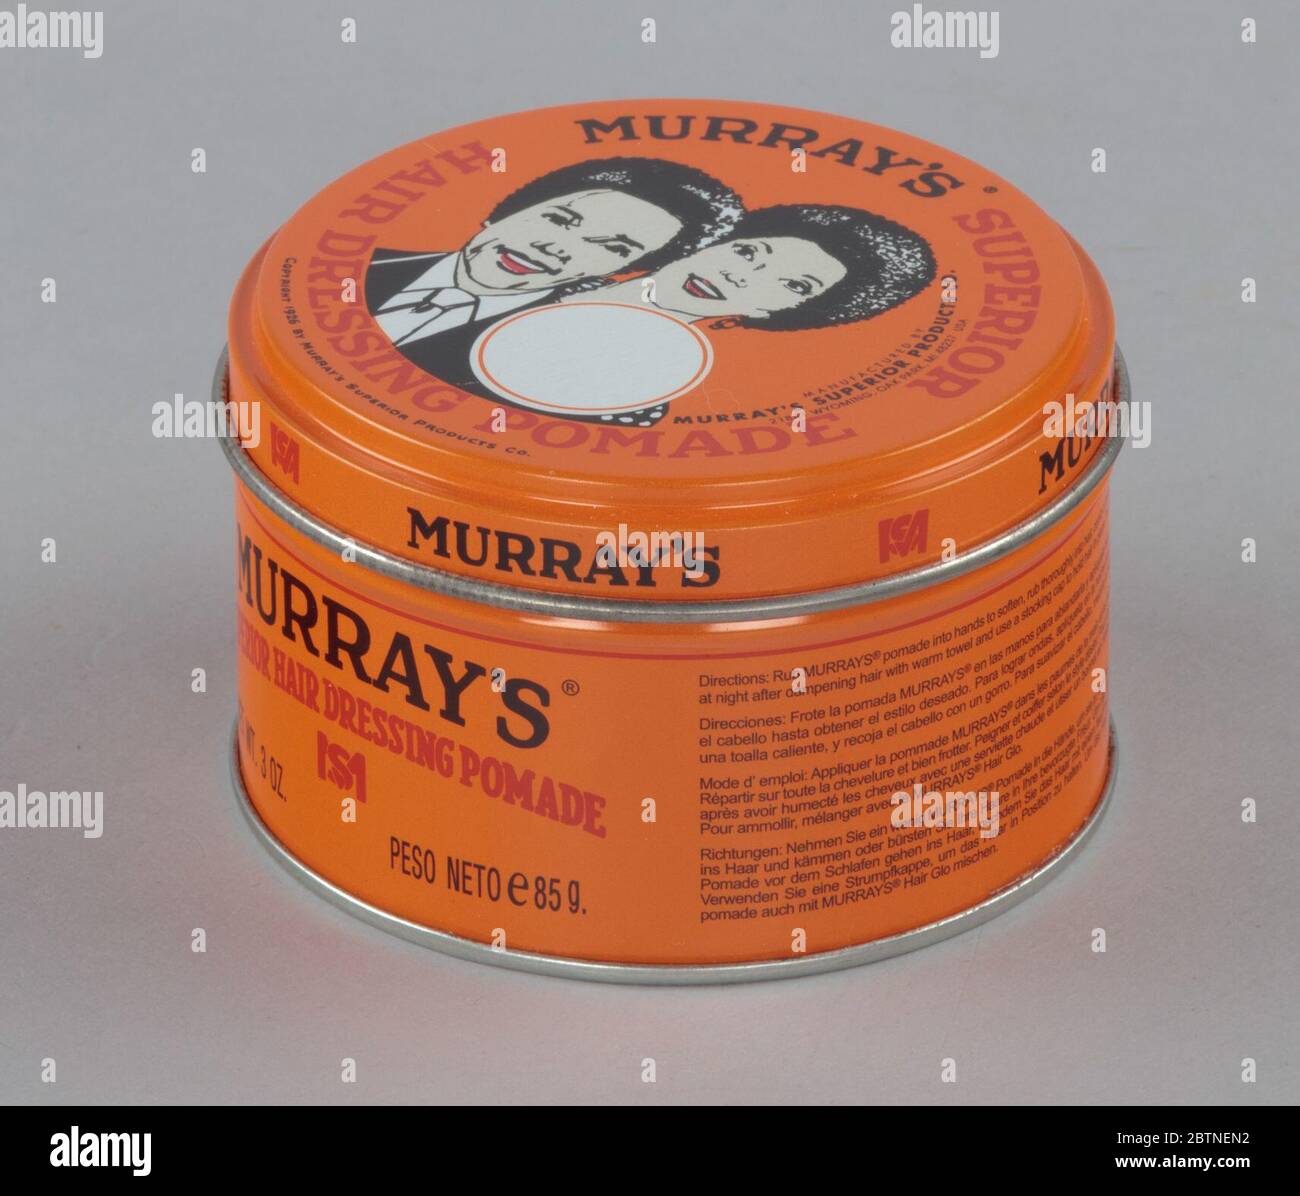 Tin for Murrays Superior Hair Dressing Pomade. A round and metal